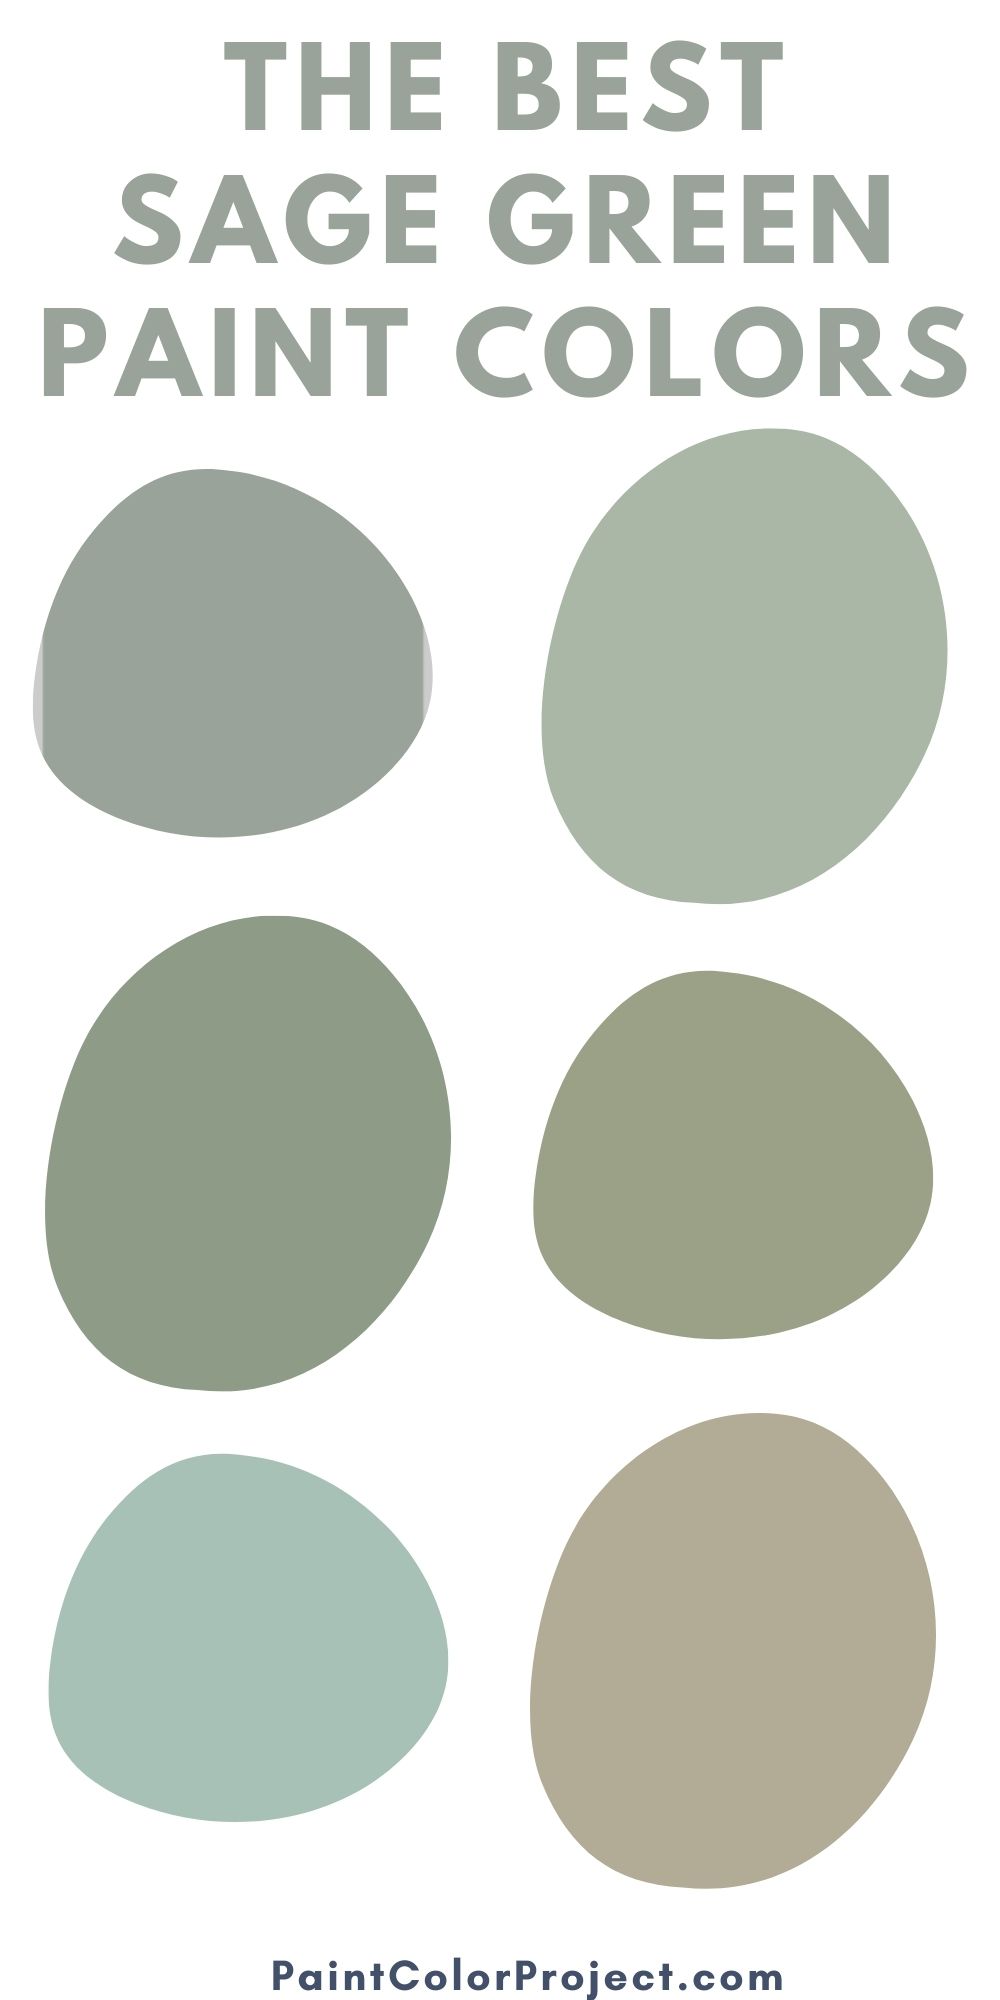 10 Sage Green Paint Colors That Bring Peace And Calm - vrogue.co